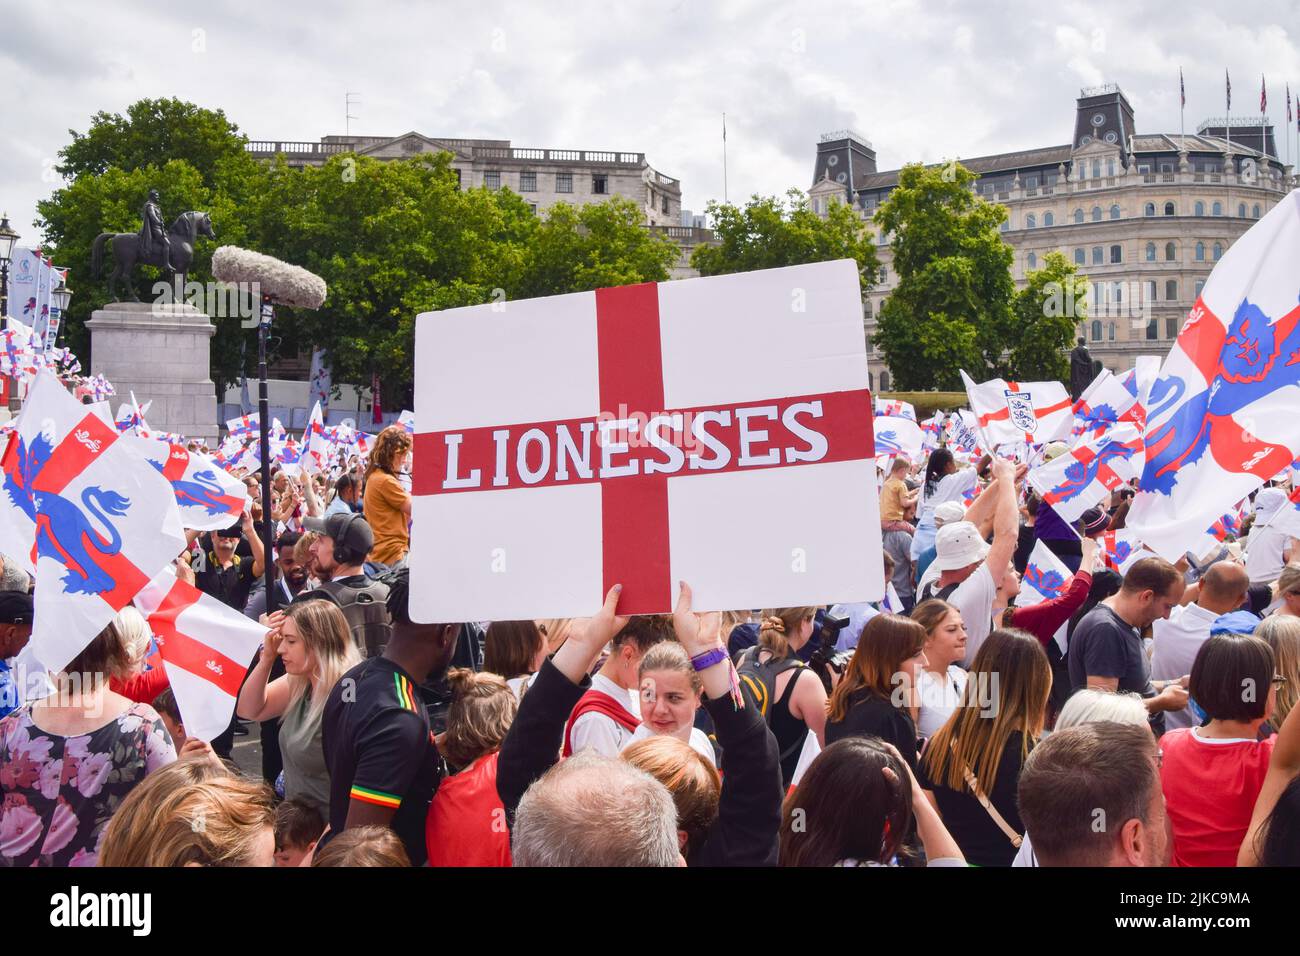 London, UK. 1st August 2022. Thousands of people gathered in Trafalgar Square to celebrate the England team - the Lionesses -  winning Women's Euro 2022 football tournament. Credit: Vuk Valcic/Alamy Live News Stock Photo